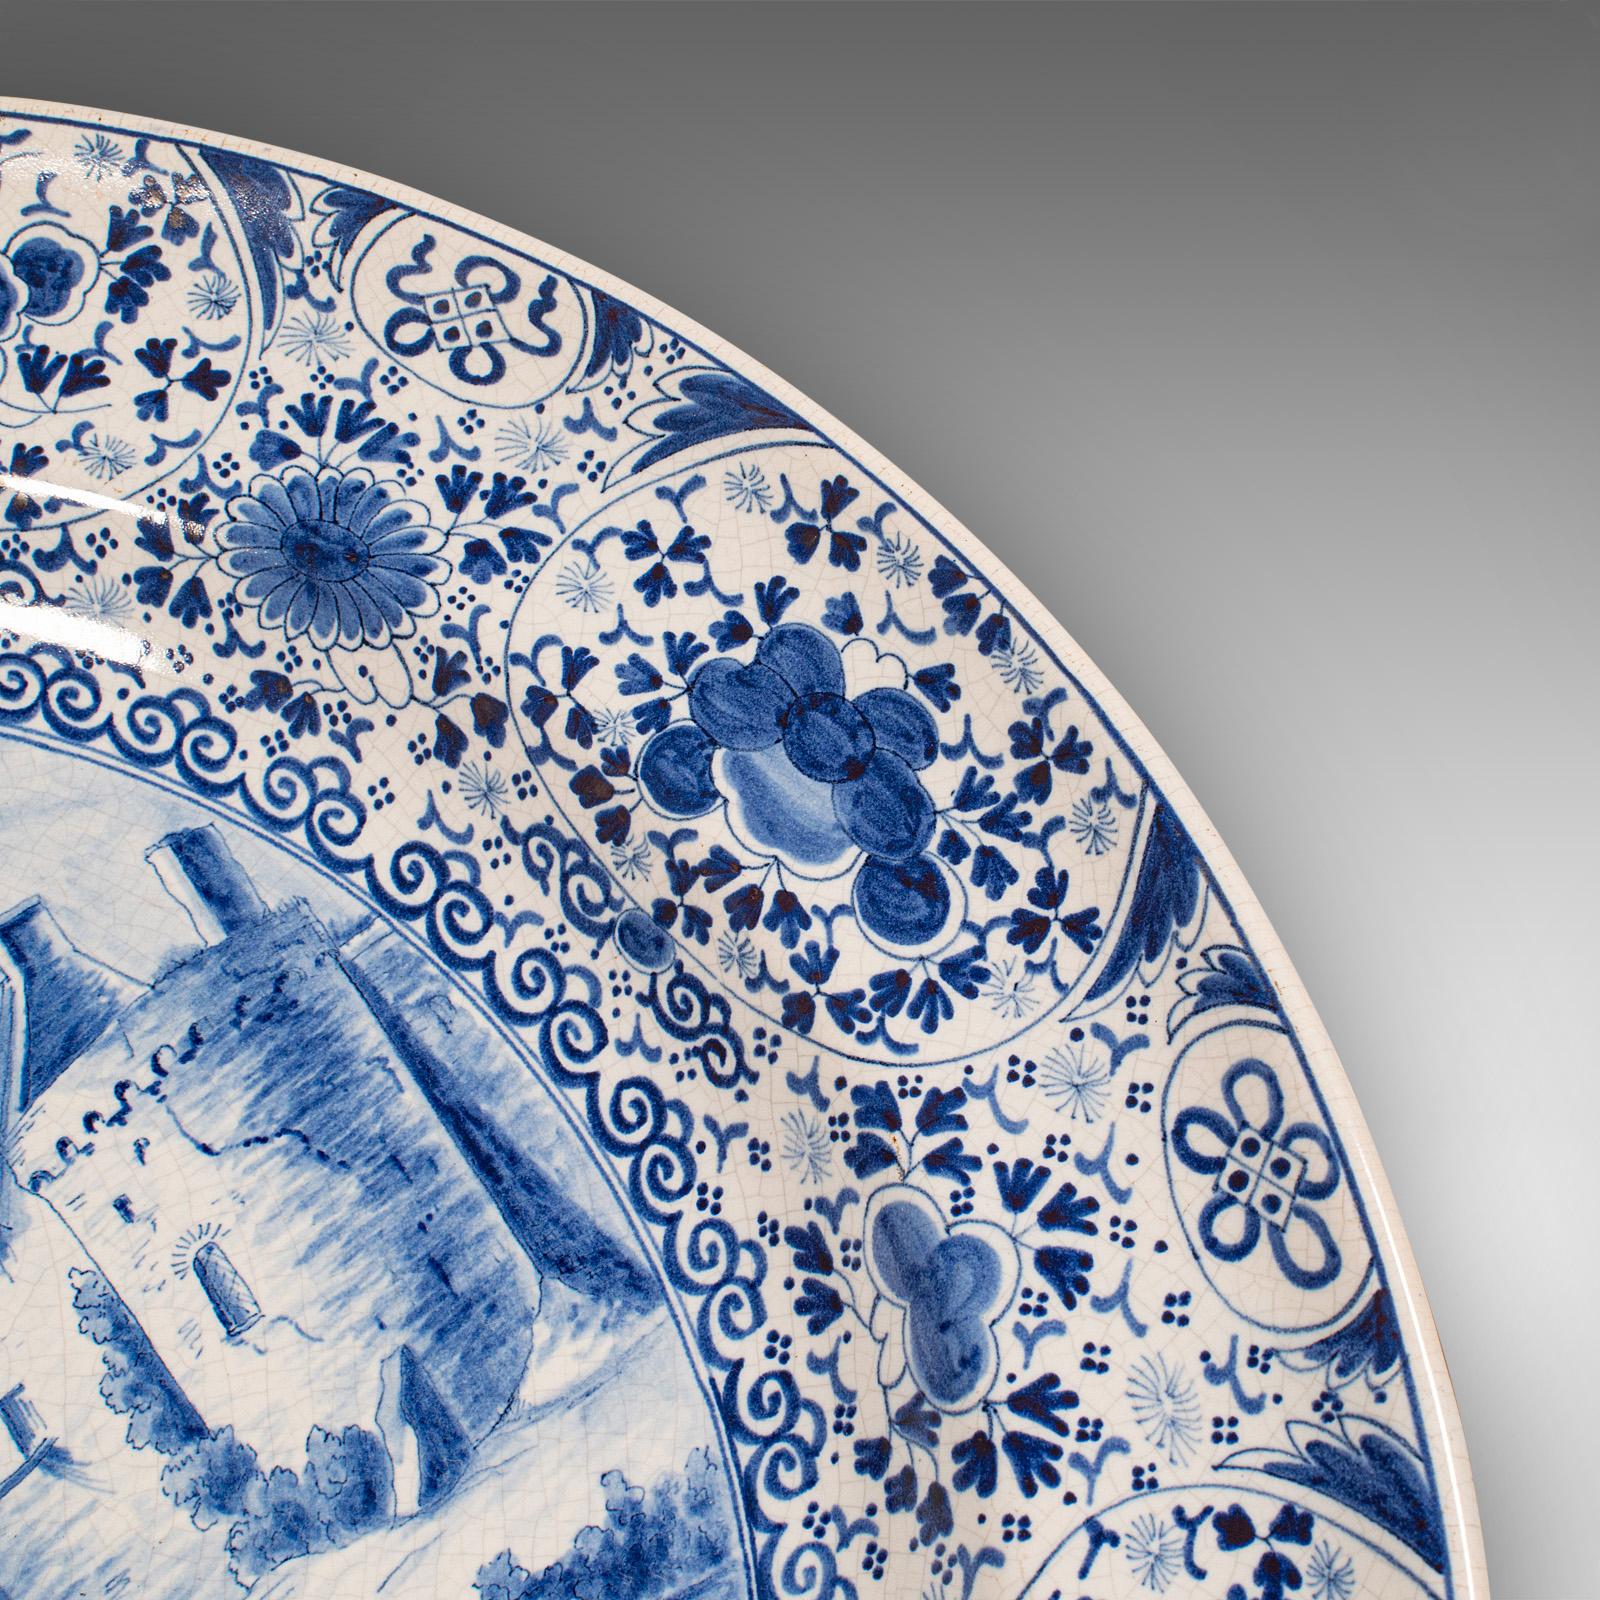 Large Antique Charger, Belgian, Ceramic, Serving Plate, Blue & White, Circa 1920 For Sale 4